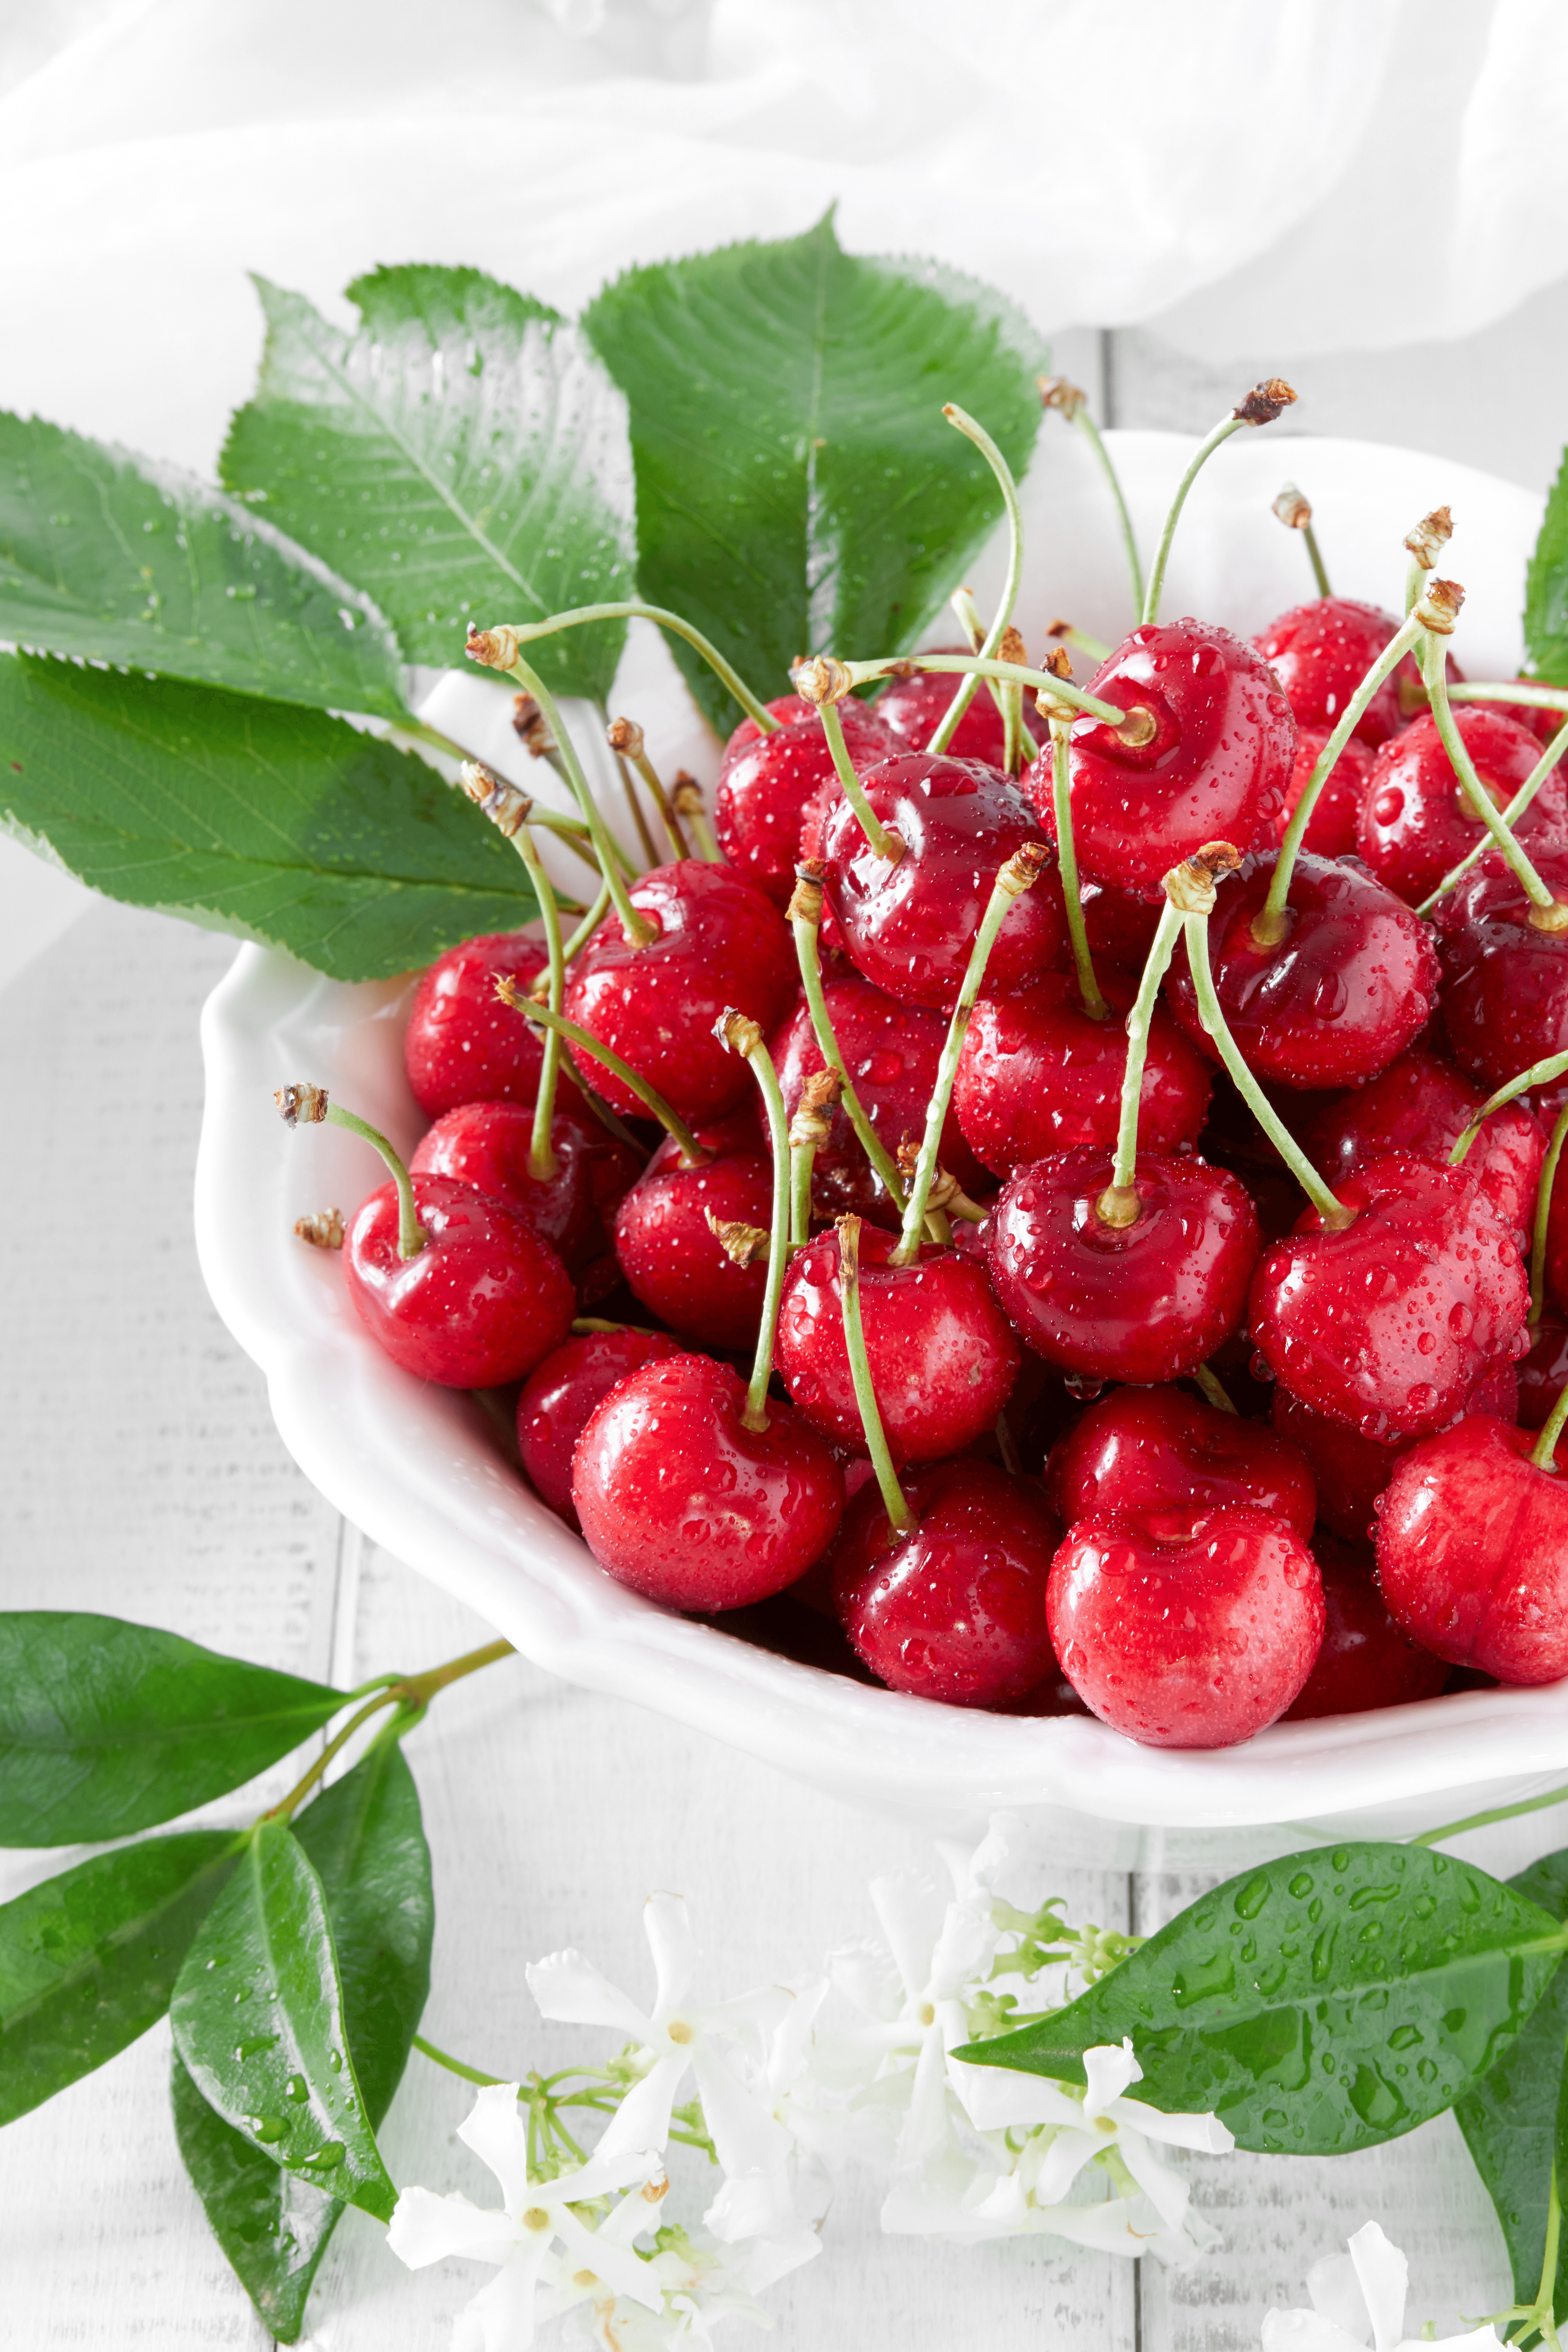 A plate with cherries